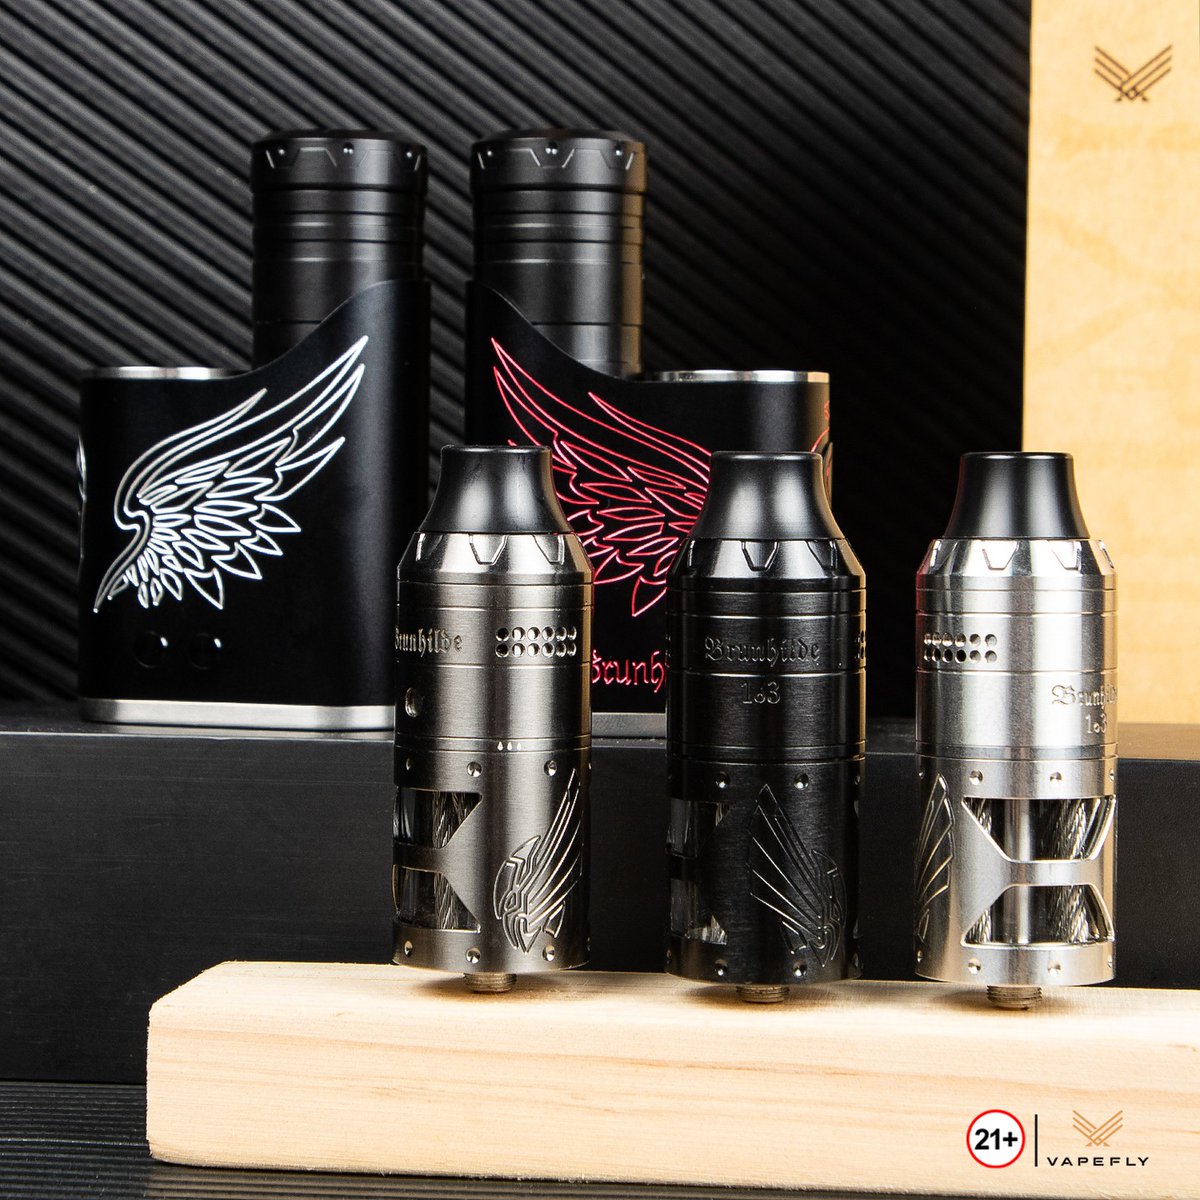 Vapefly Brunhilde 1o3 RTA Easy pull and plug interchangeable airflow slots, give more airflow options.😍 ⚠ Warning: The device is used with e-liquid which contains addictive chemical nicotine. For Adult use only. #sourcemore #sourcemoreofficial #Vapefly #Brunhilde